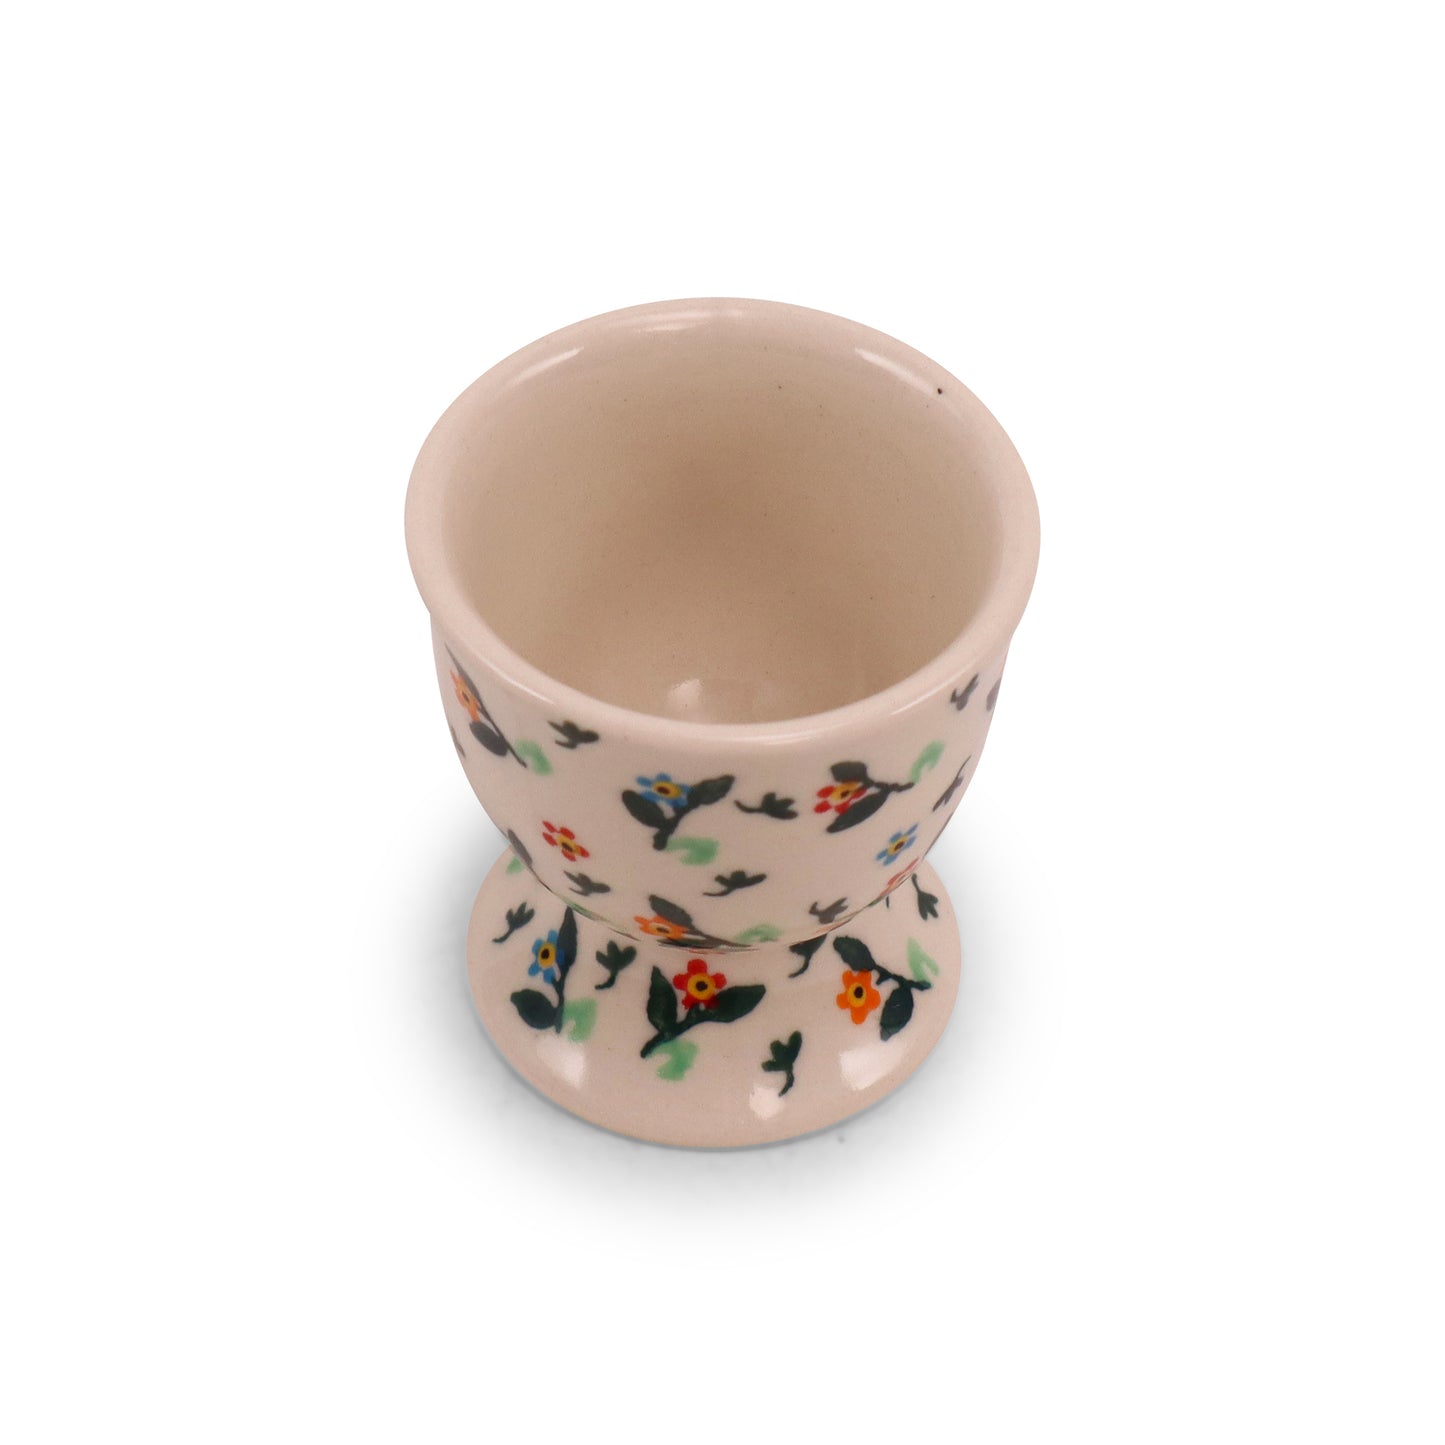 2"x3" Egg Cup. Pattern: 0209